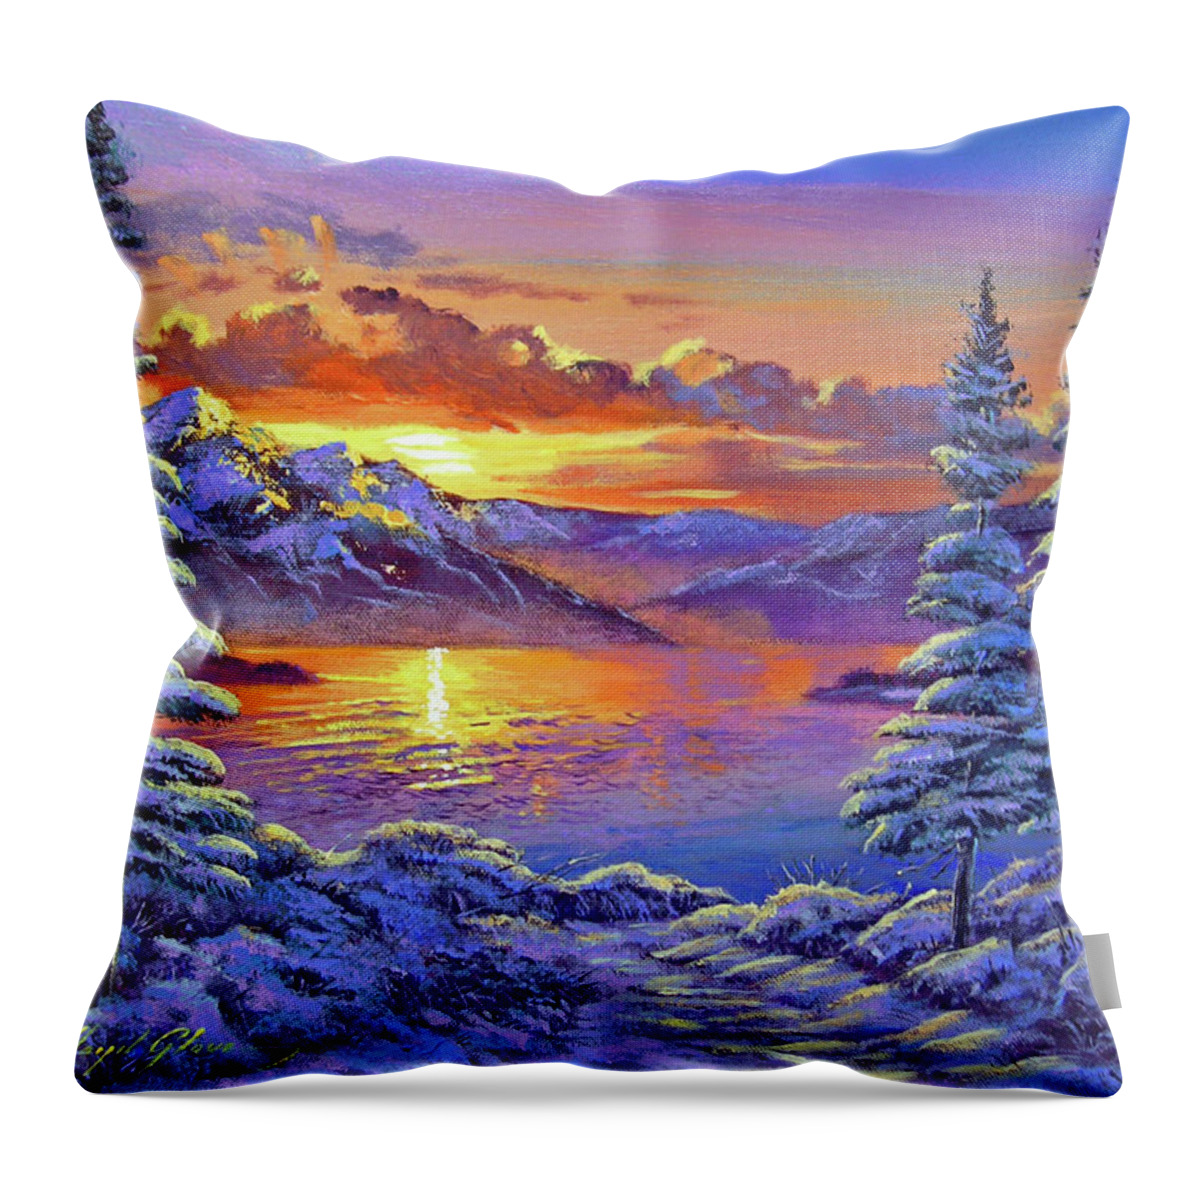 Landscape Throw Pillow featuring the painting Snowy Road by David Lloyd Glover